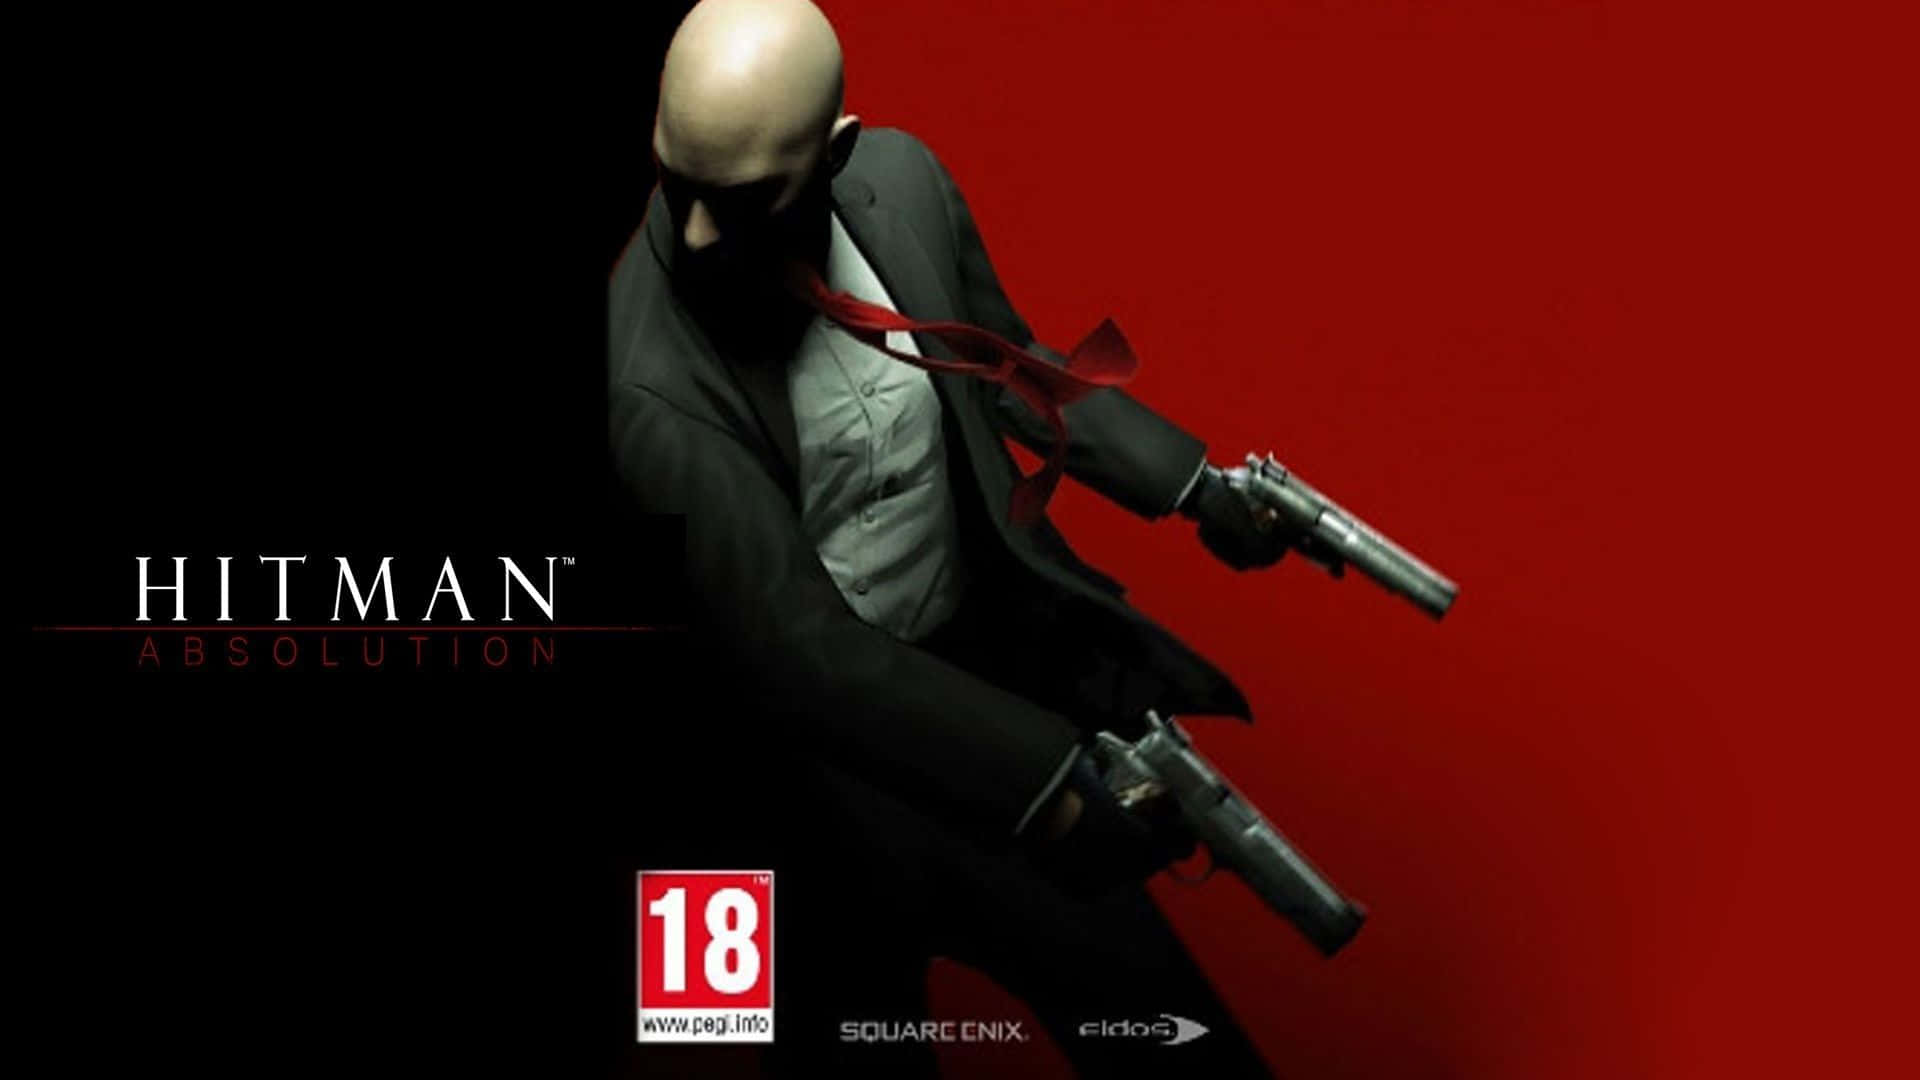 Armed and dangerous – Hitman Absolution